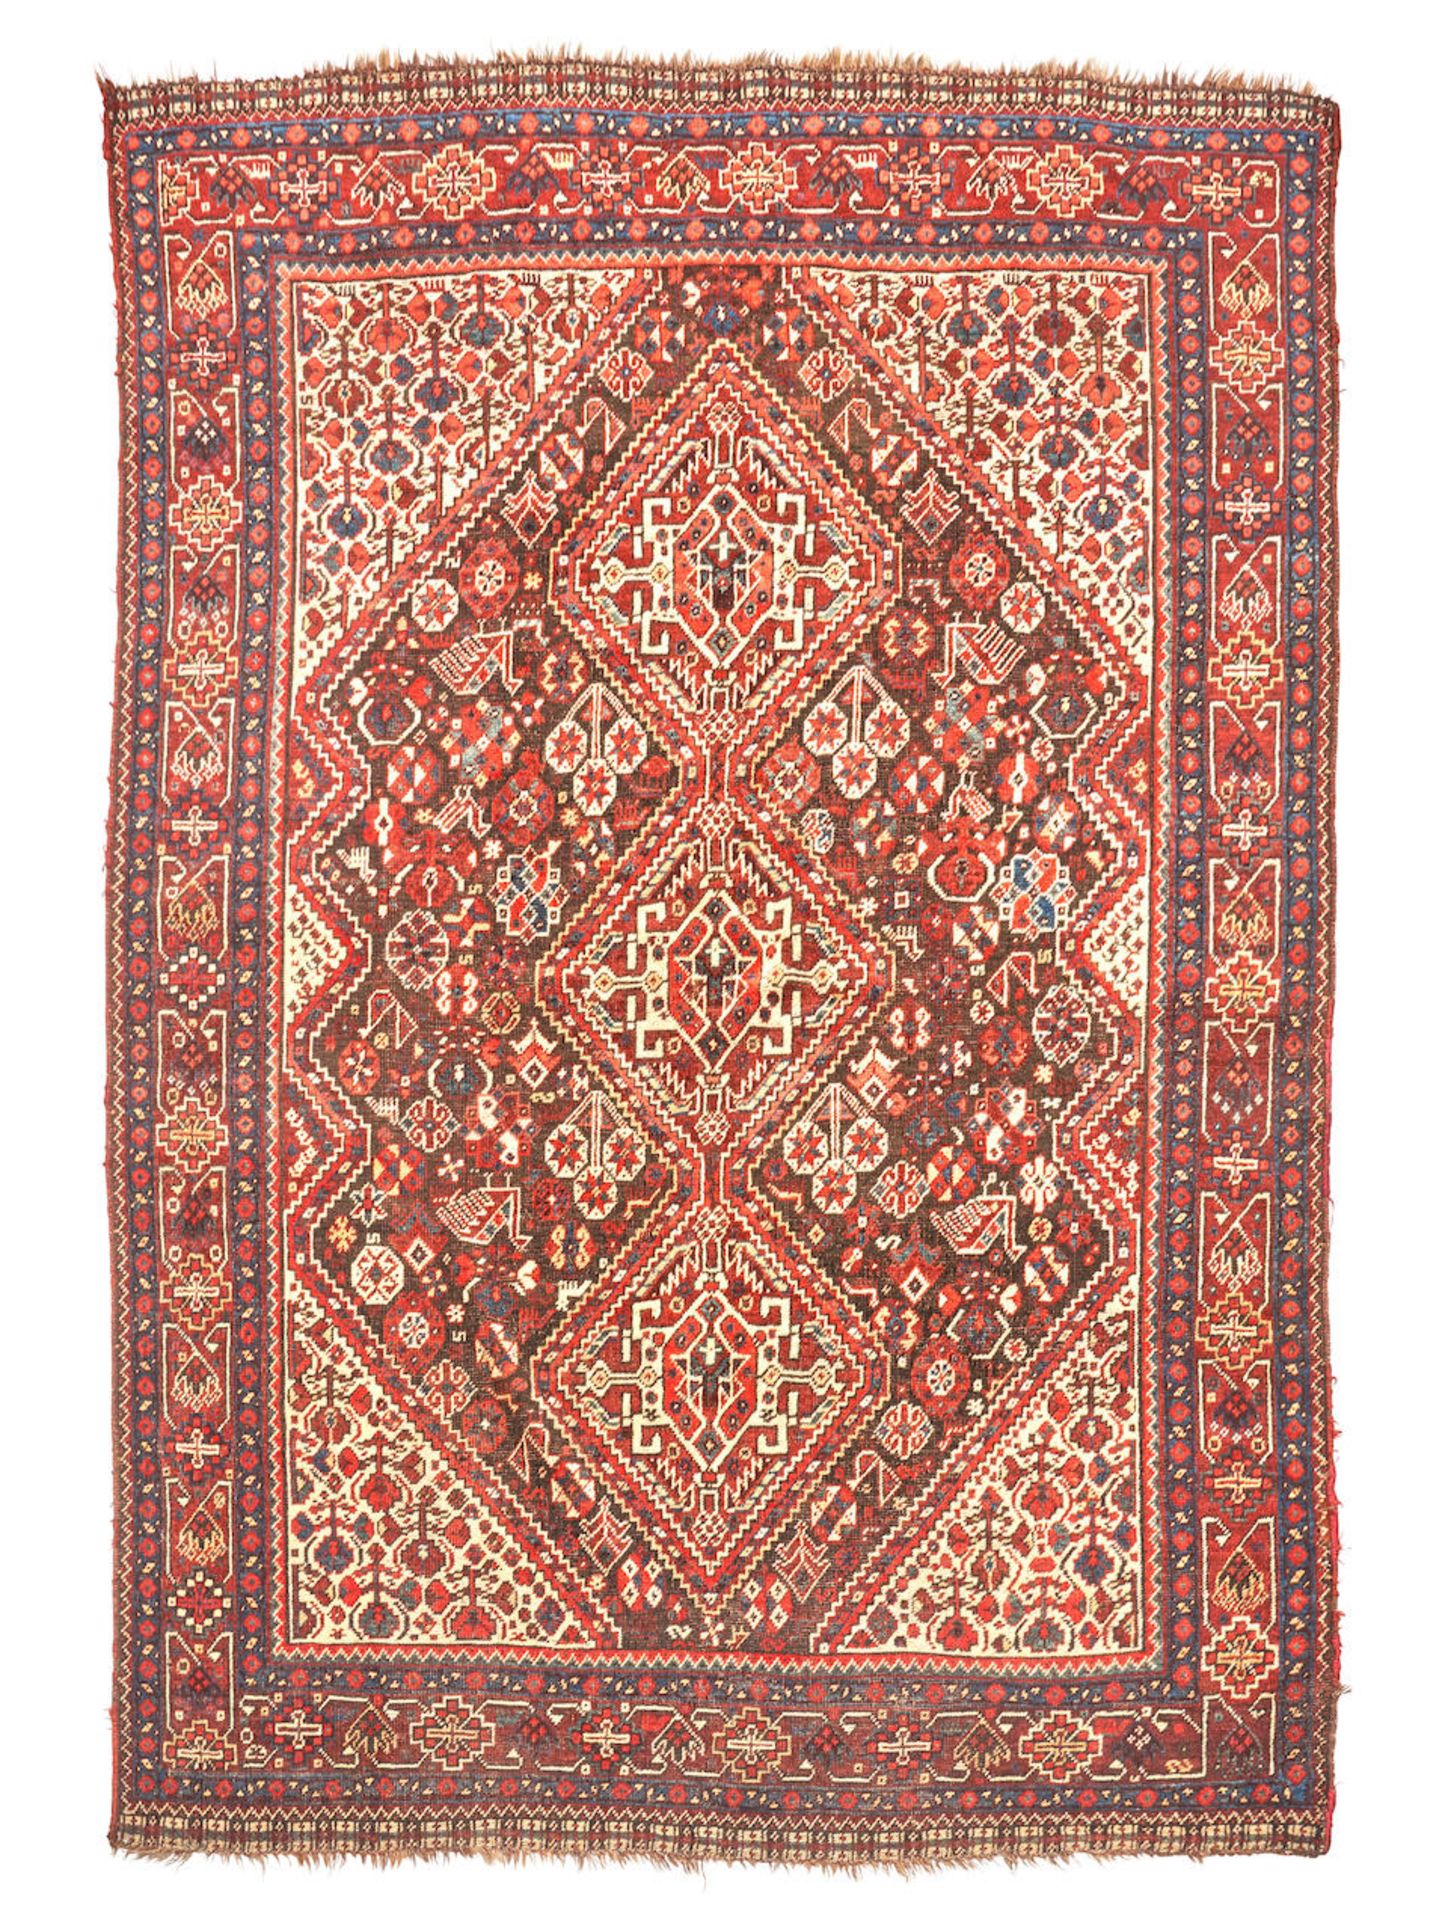 Southwest Persian Rug Iran 4 ft. 11 in. x 7 ft.